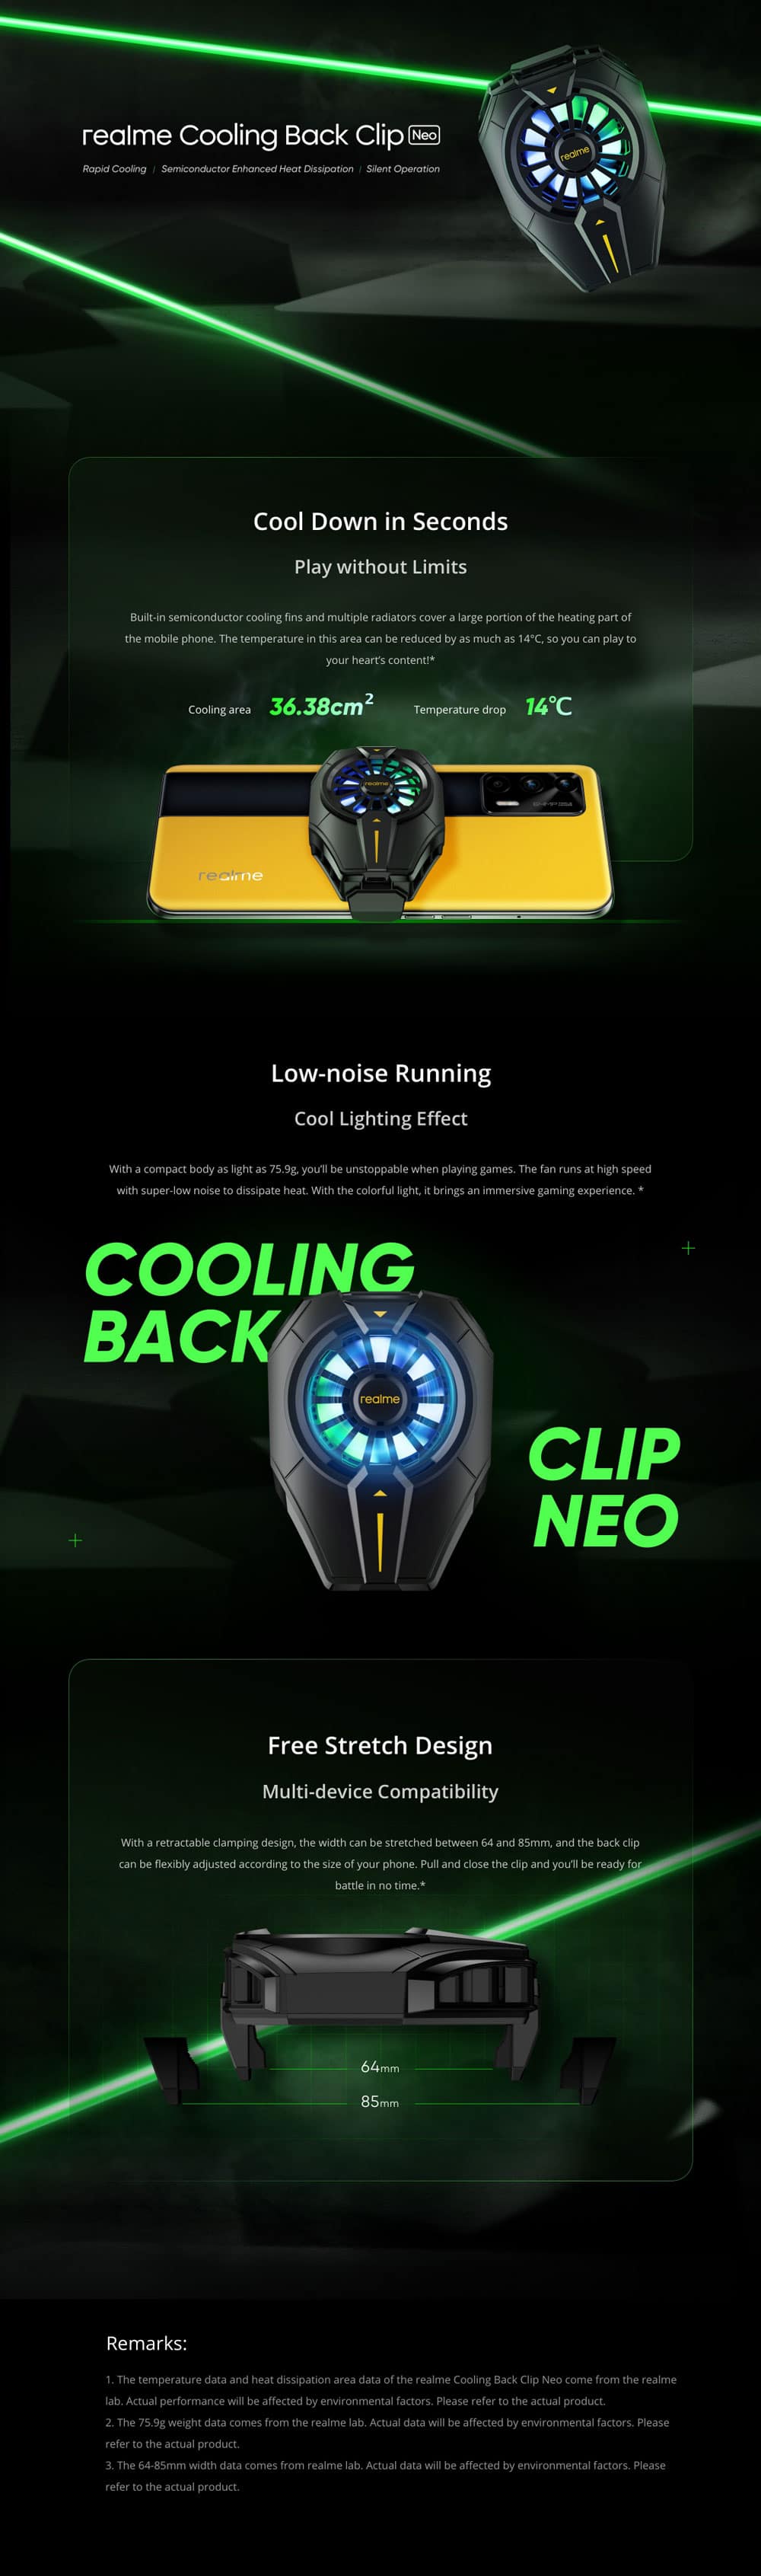 Realme Cooling Back Clip Neo 6